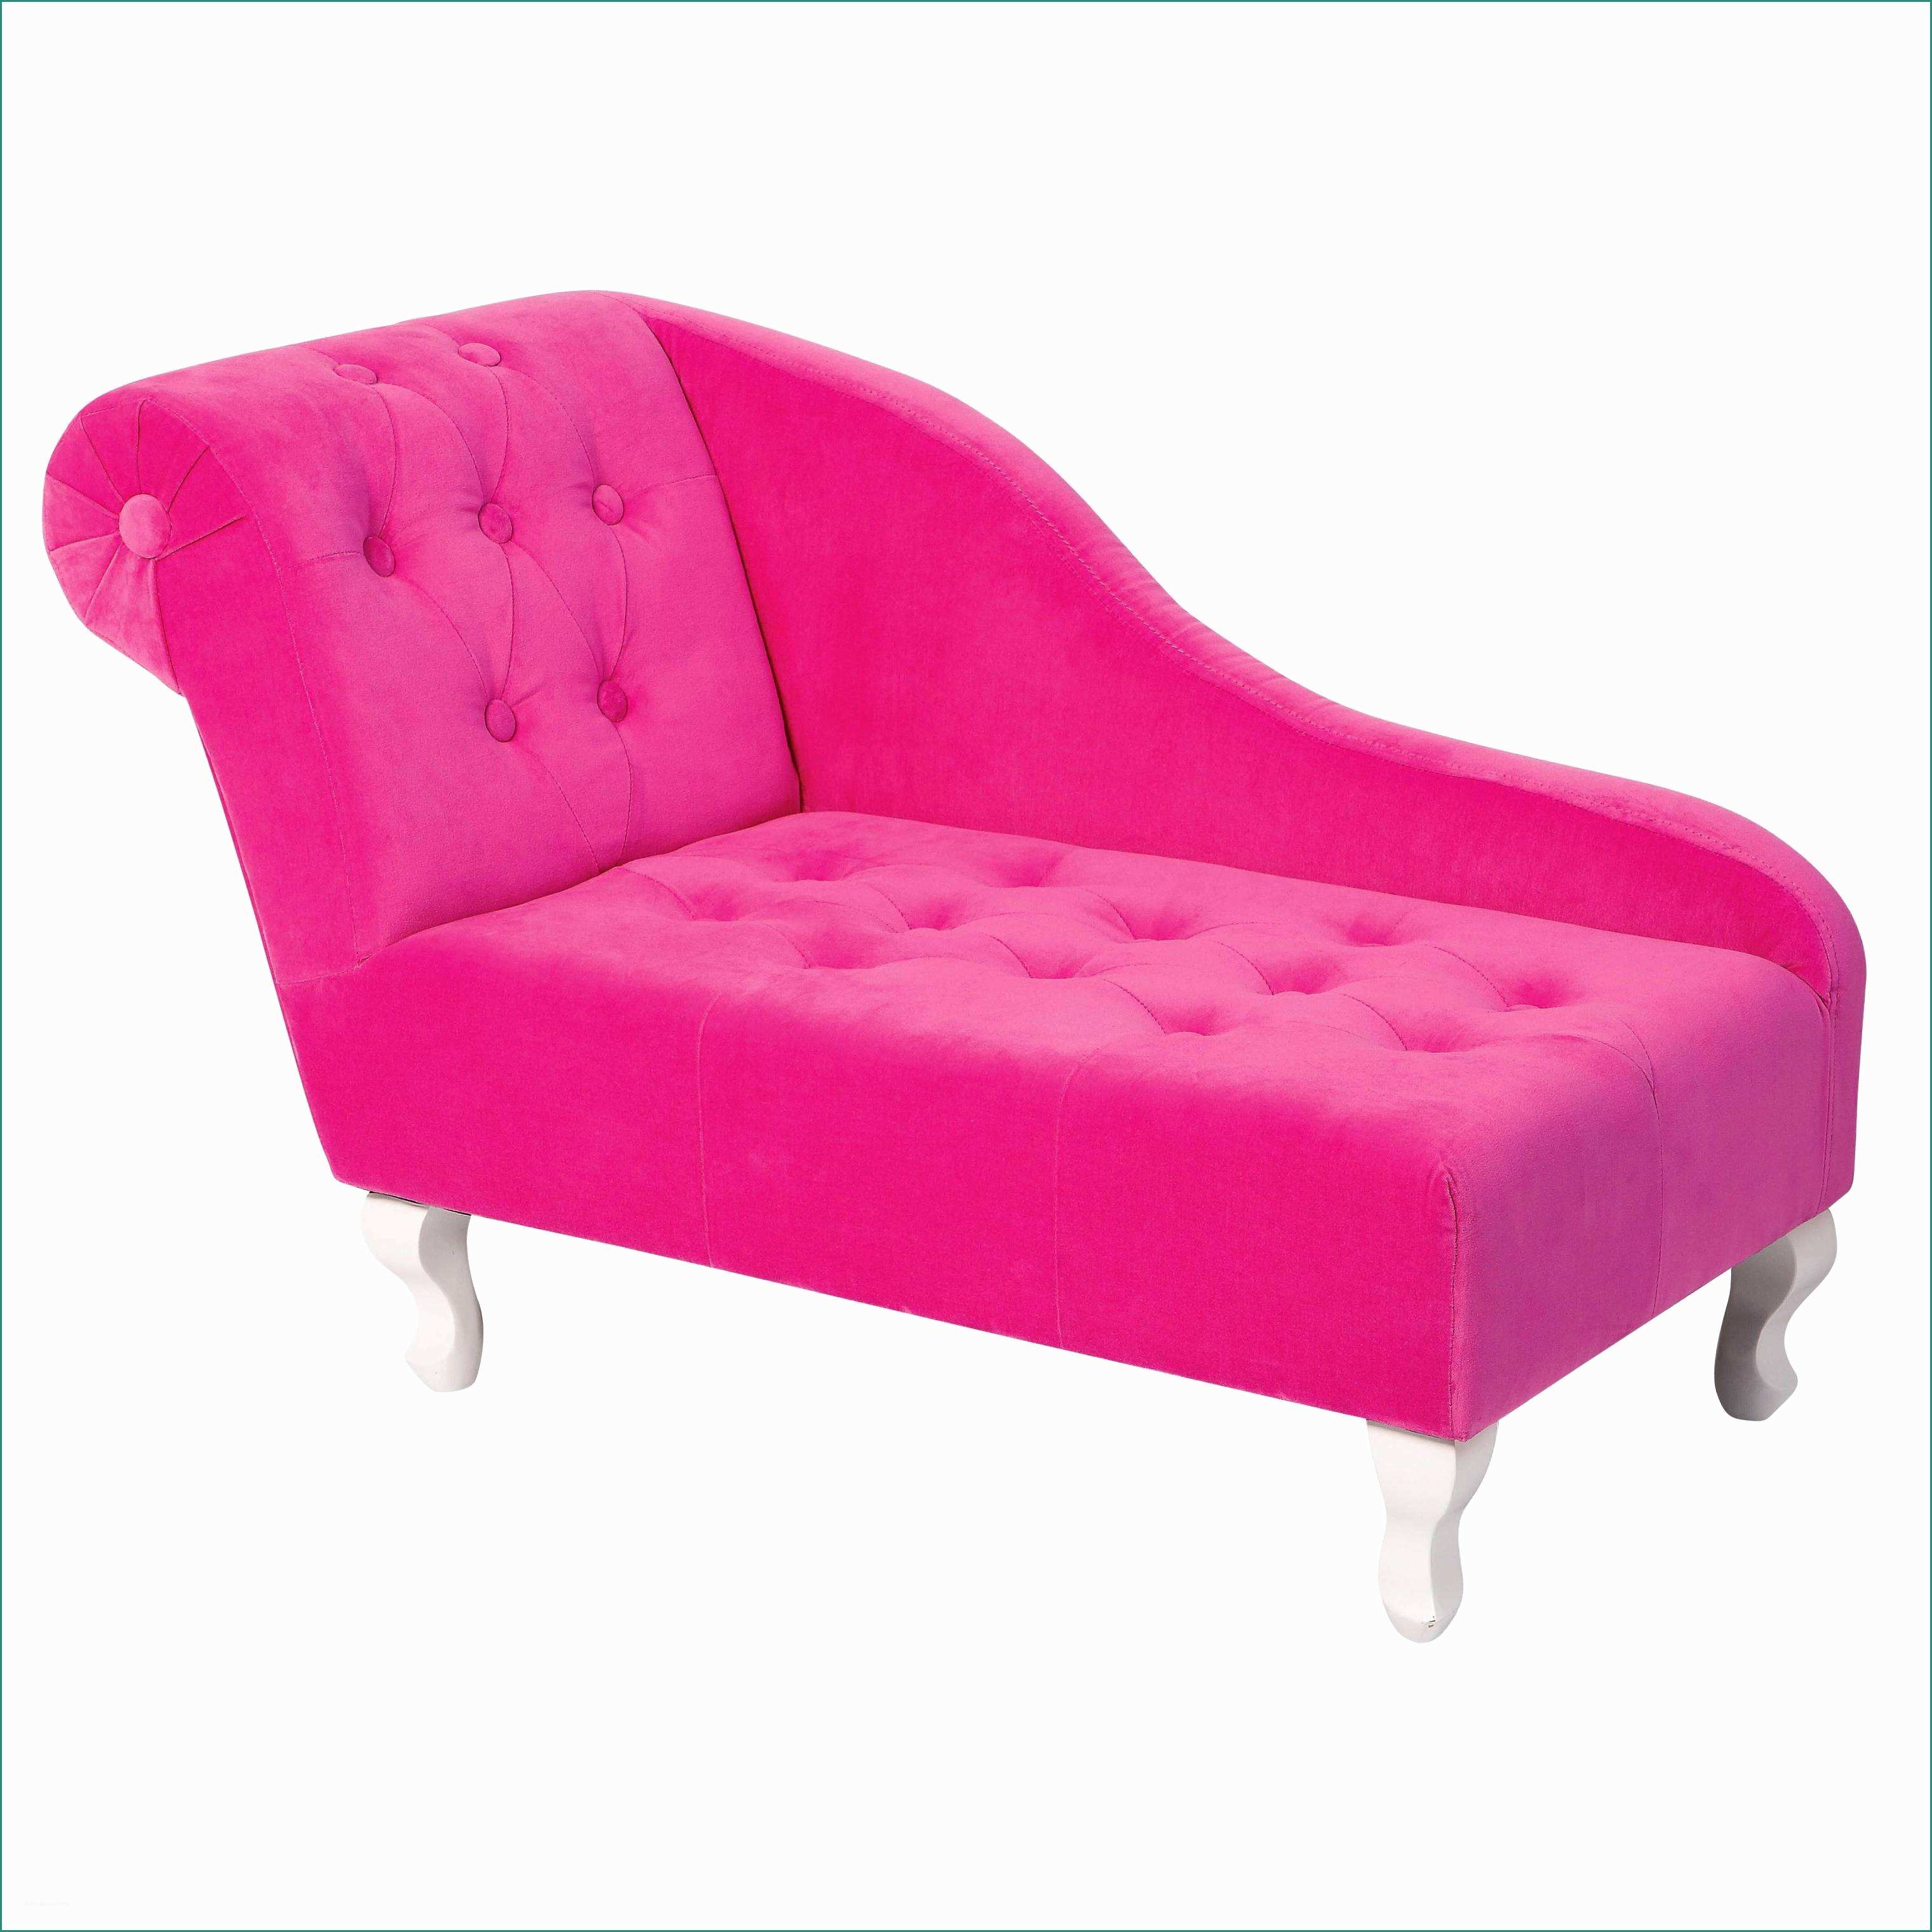 Poltrona Chaise Longue E 30 Inspiration for Victorian Chaise Lounge Chair